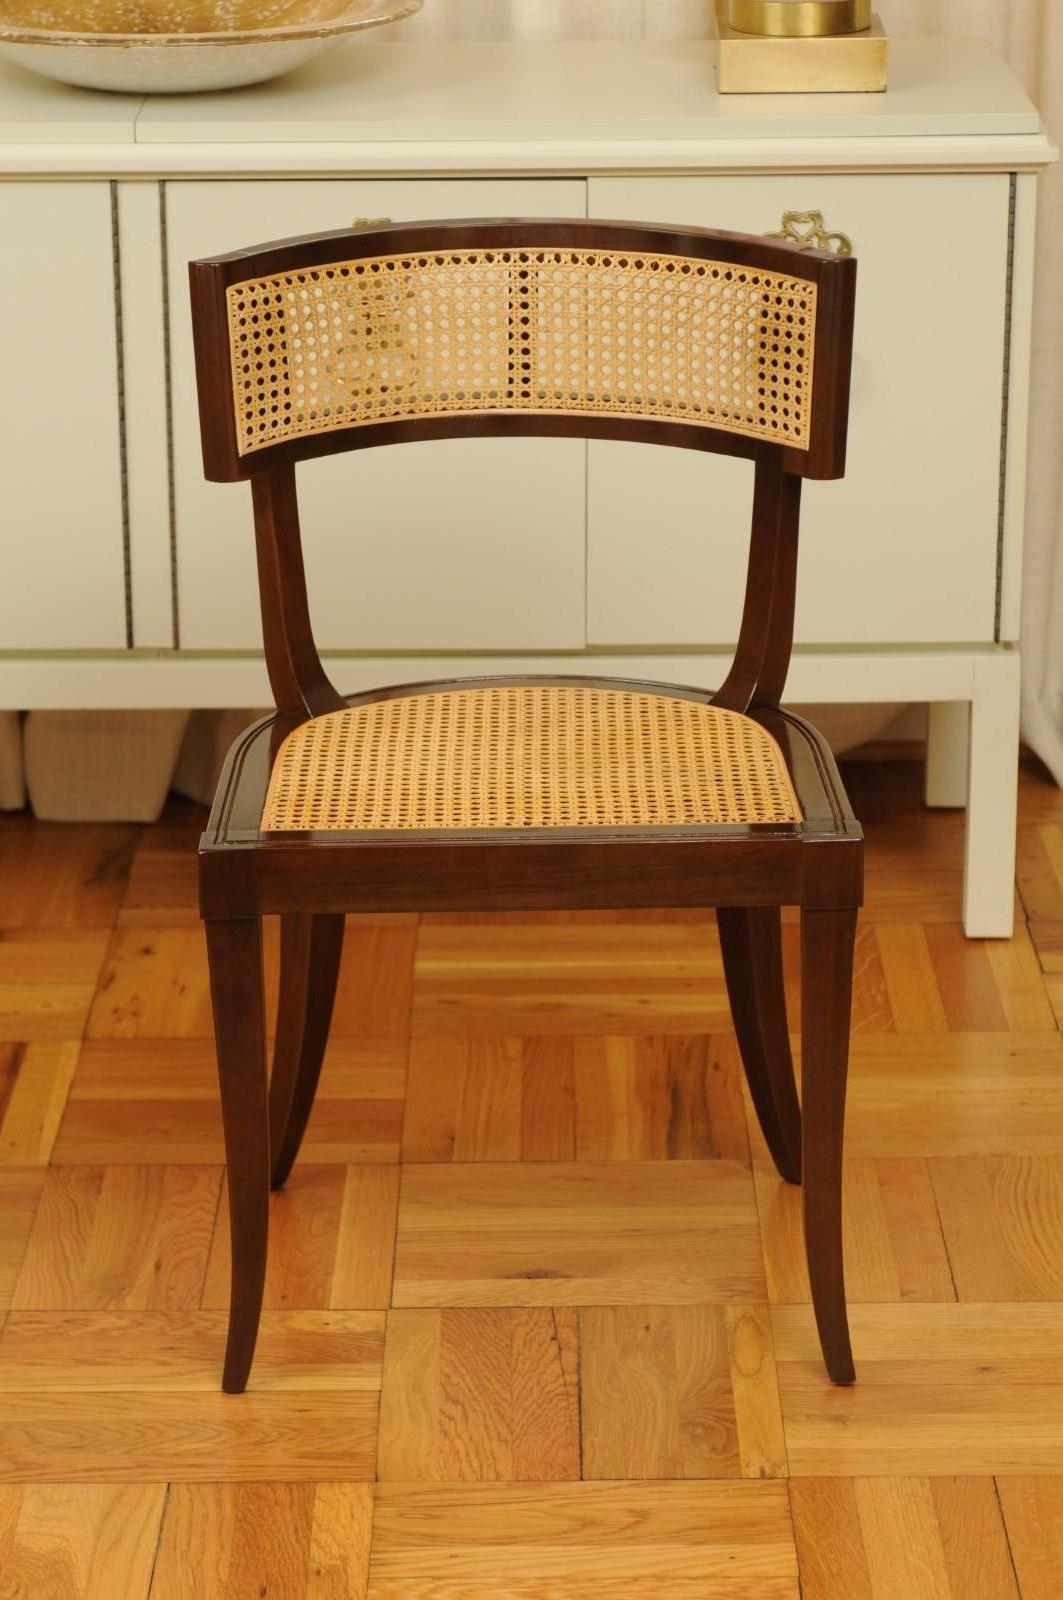 Exquisite Set of 10 Klismos Cane Dining Chairs by Baker, circa 1958, Cane Seats In Excellent Condition For Sale In Atlanta, GA